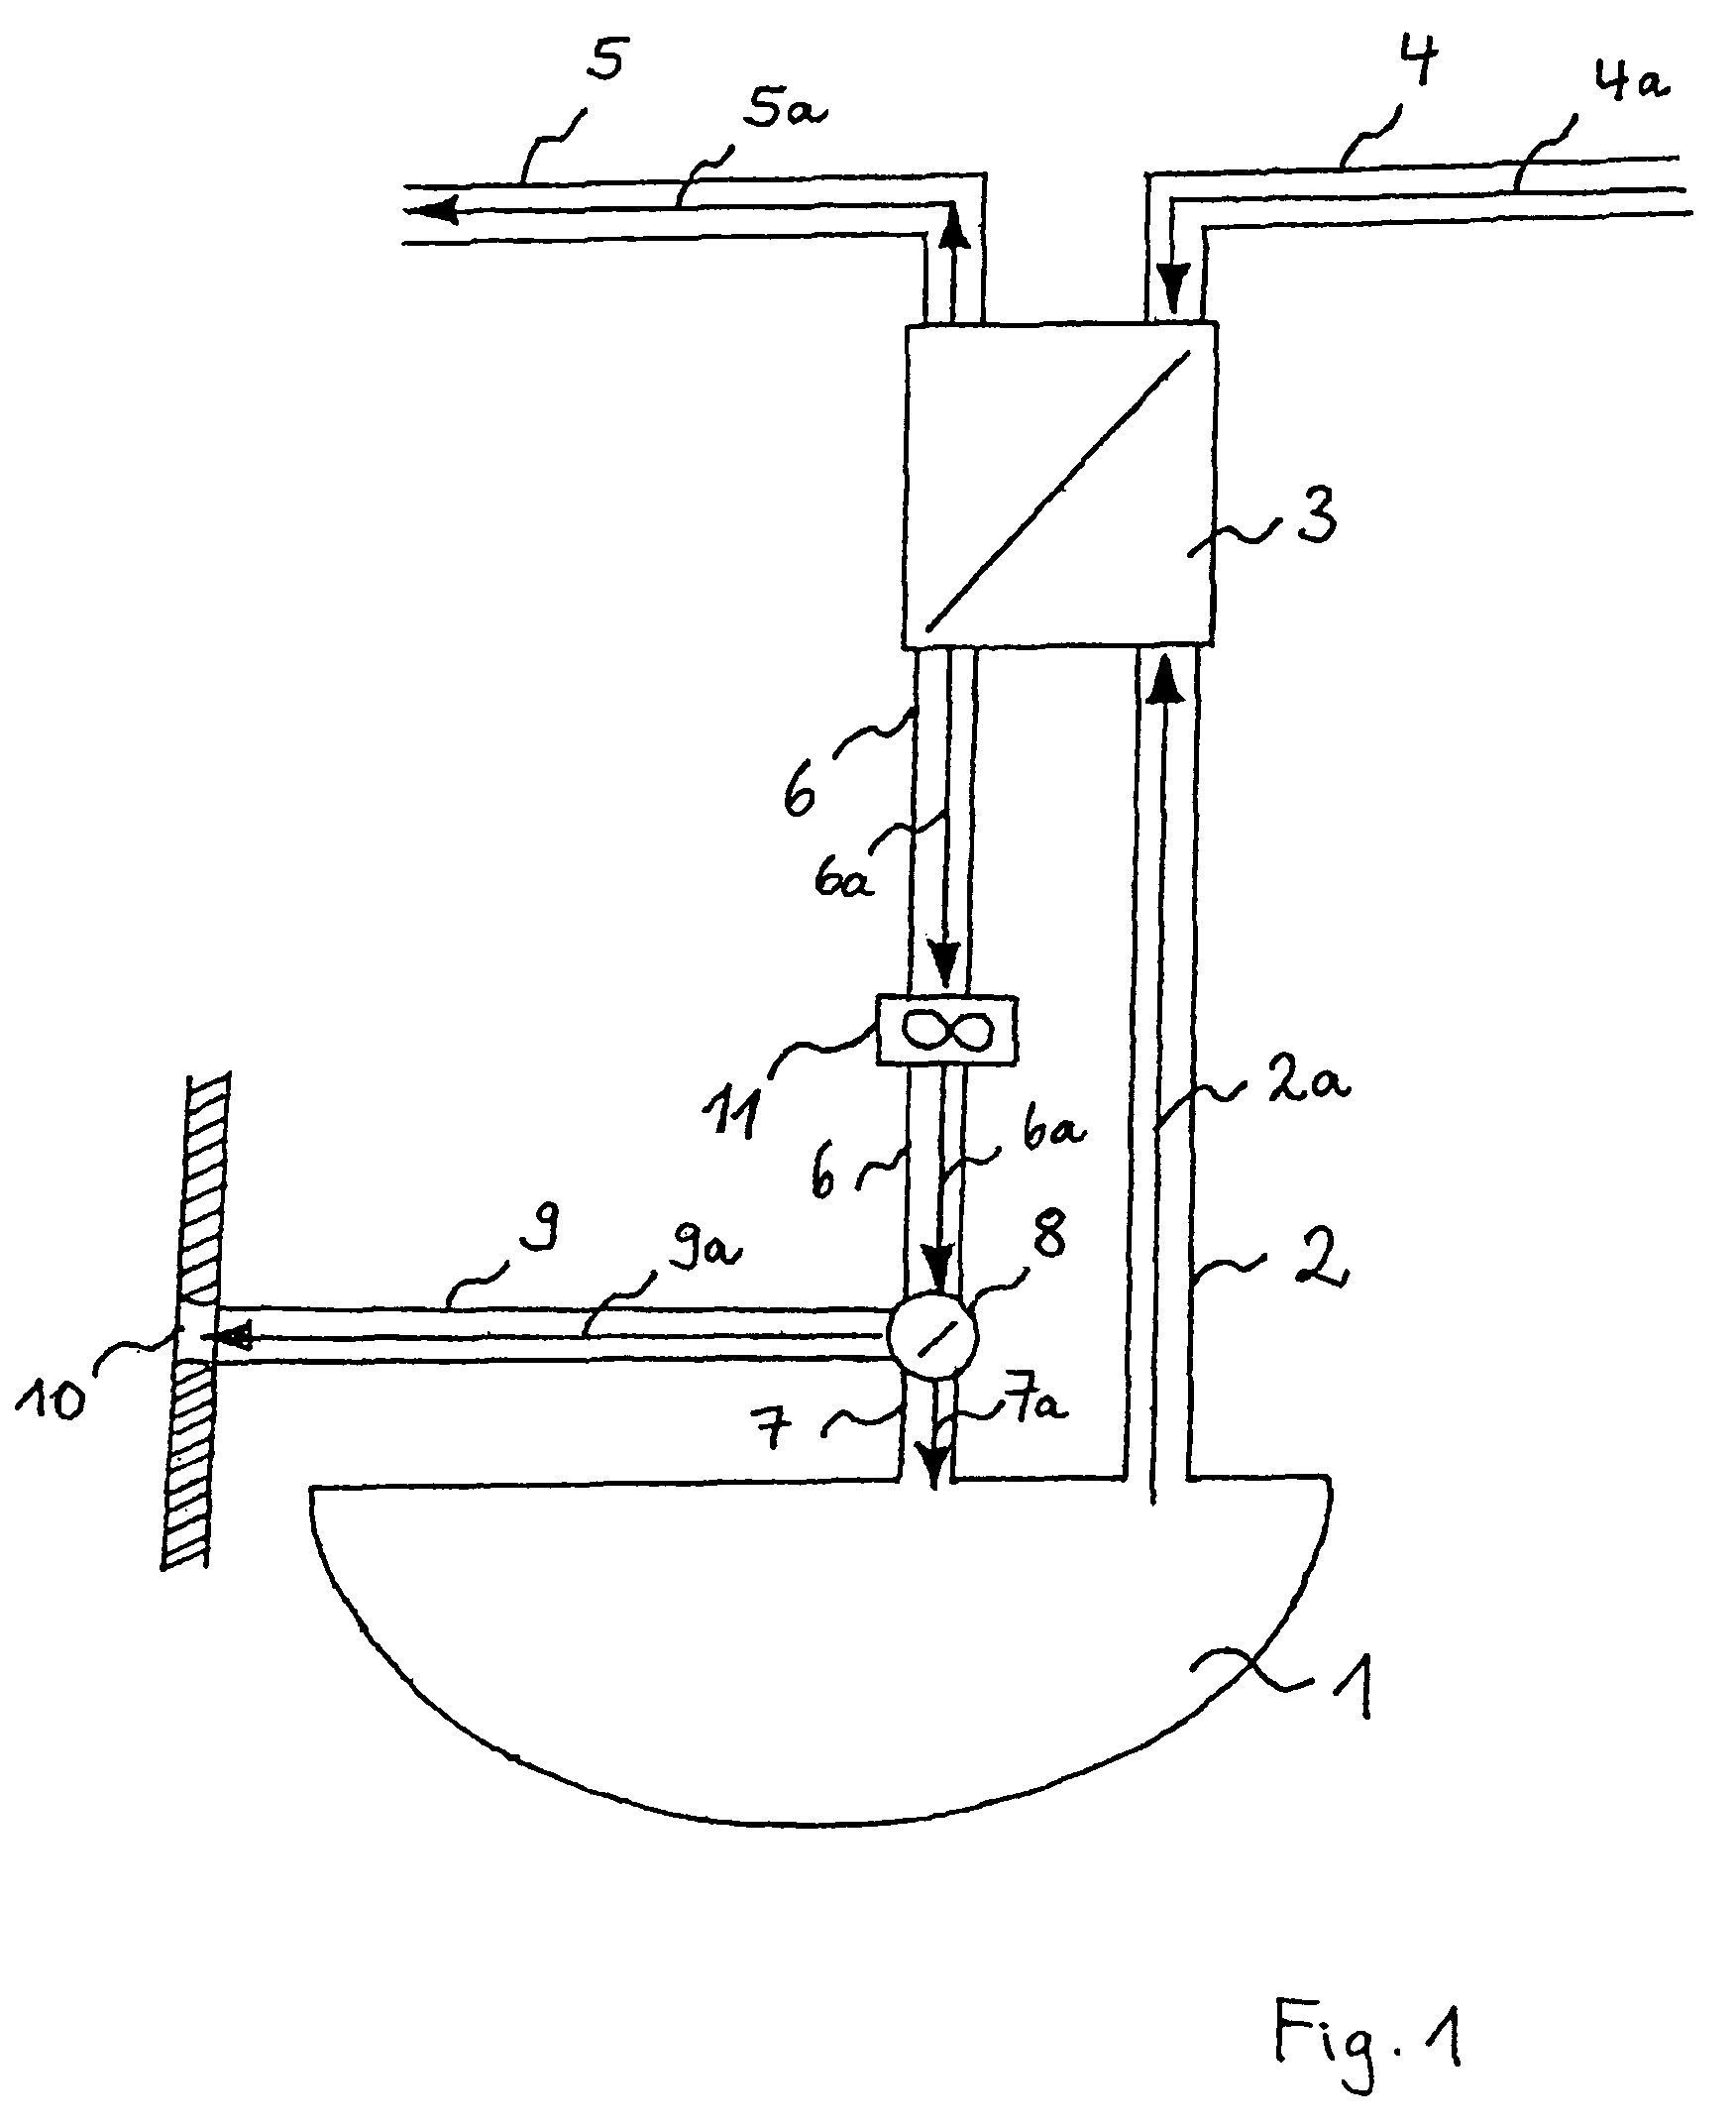 Arrangement and method for utilizing the heat of waste air for heating the bilge area of aircraft